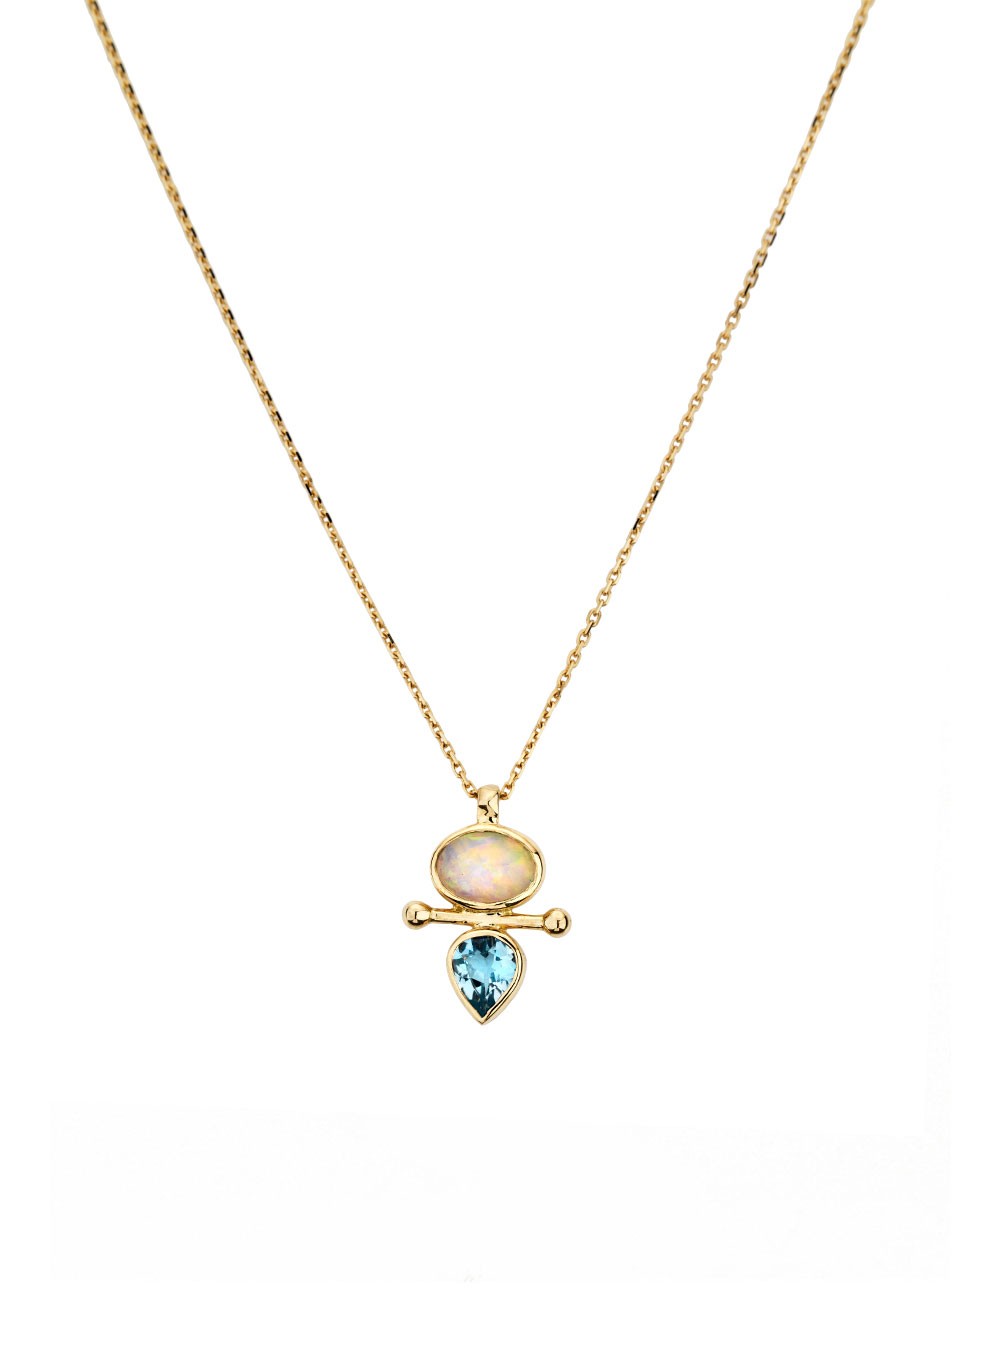 YELLOW GOLD PENDANT NECKLACE